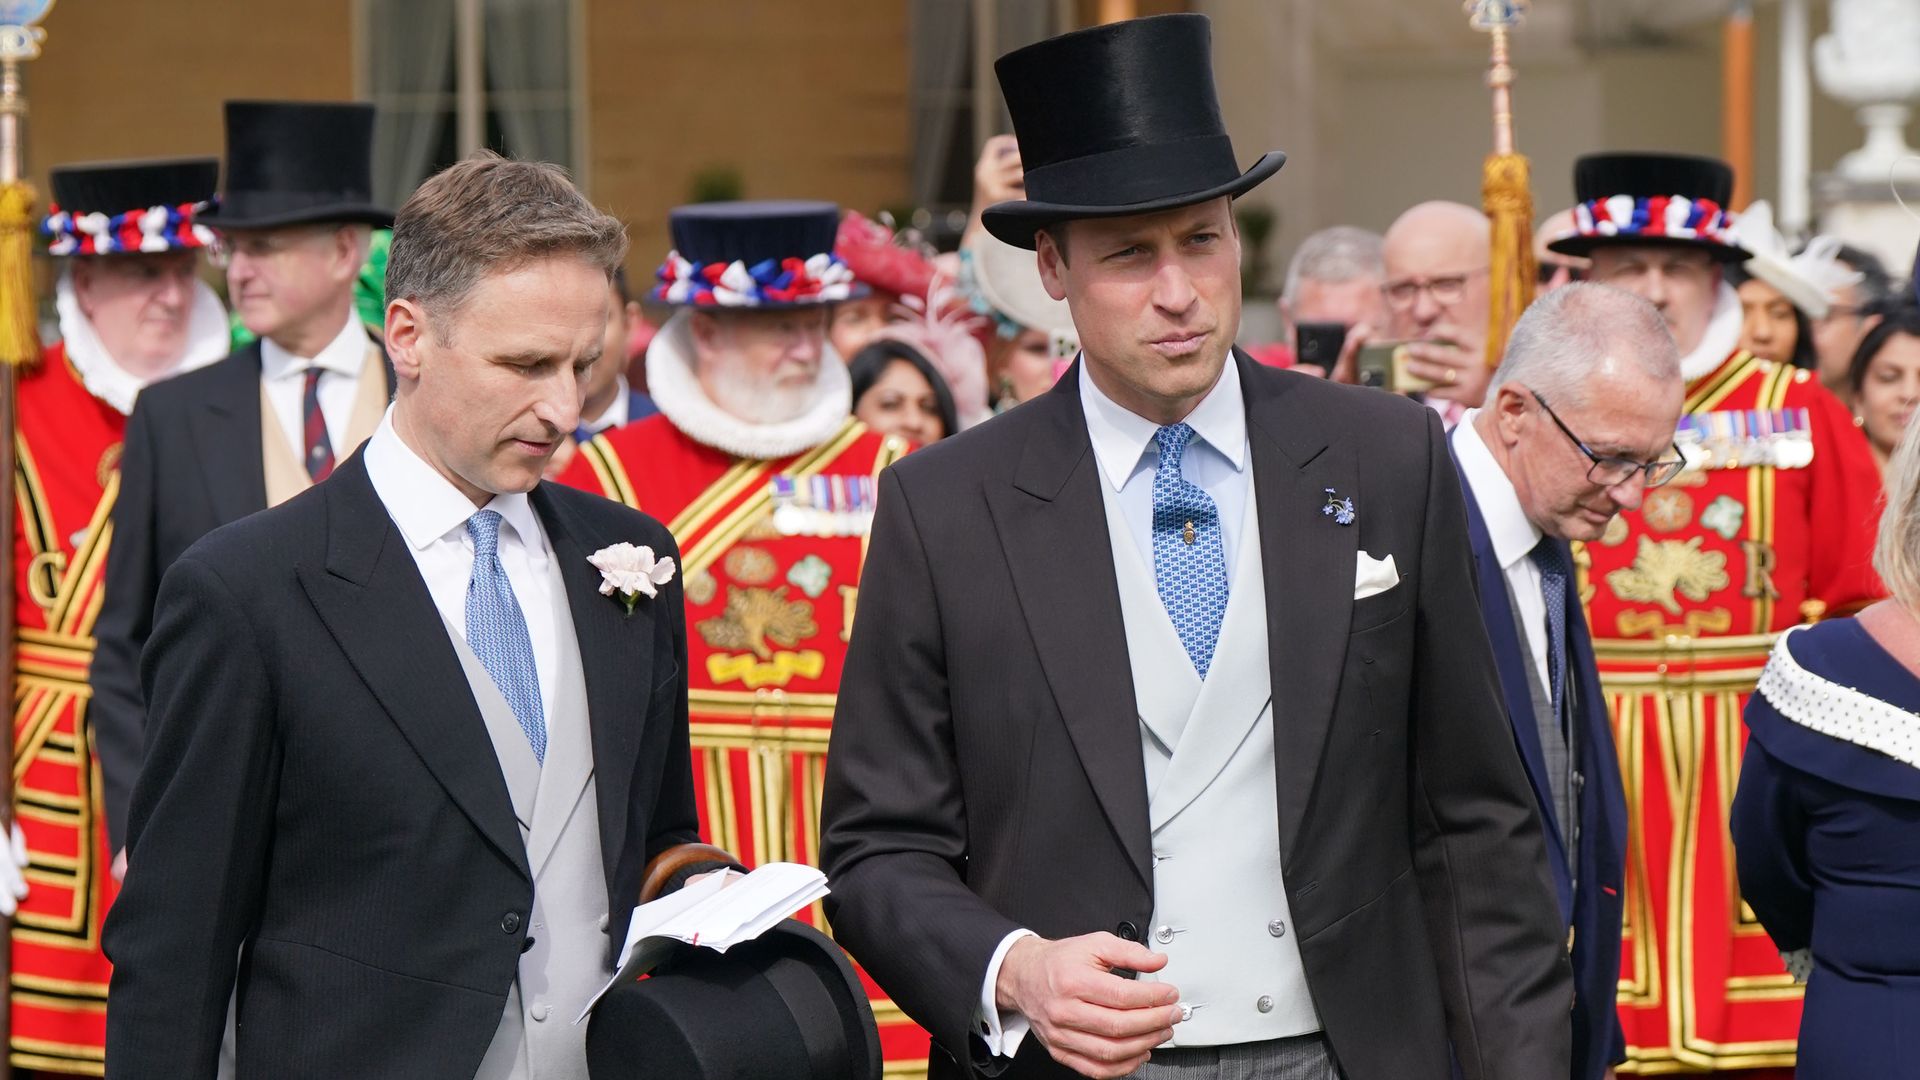 Prince William appeared to be wearing a buttonhole with Forget-me-nots